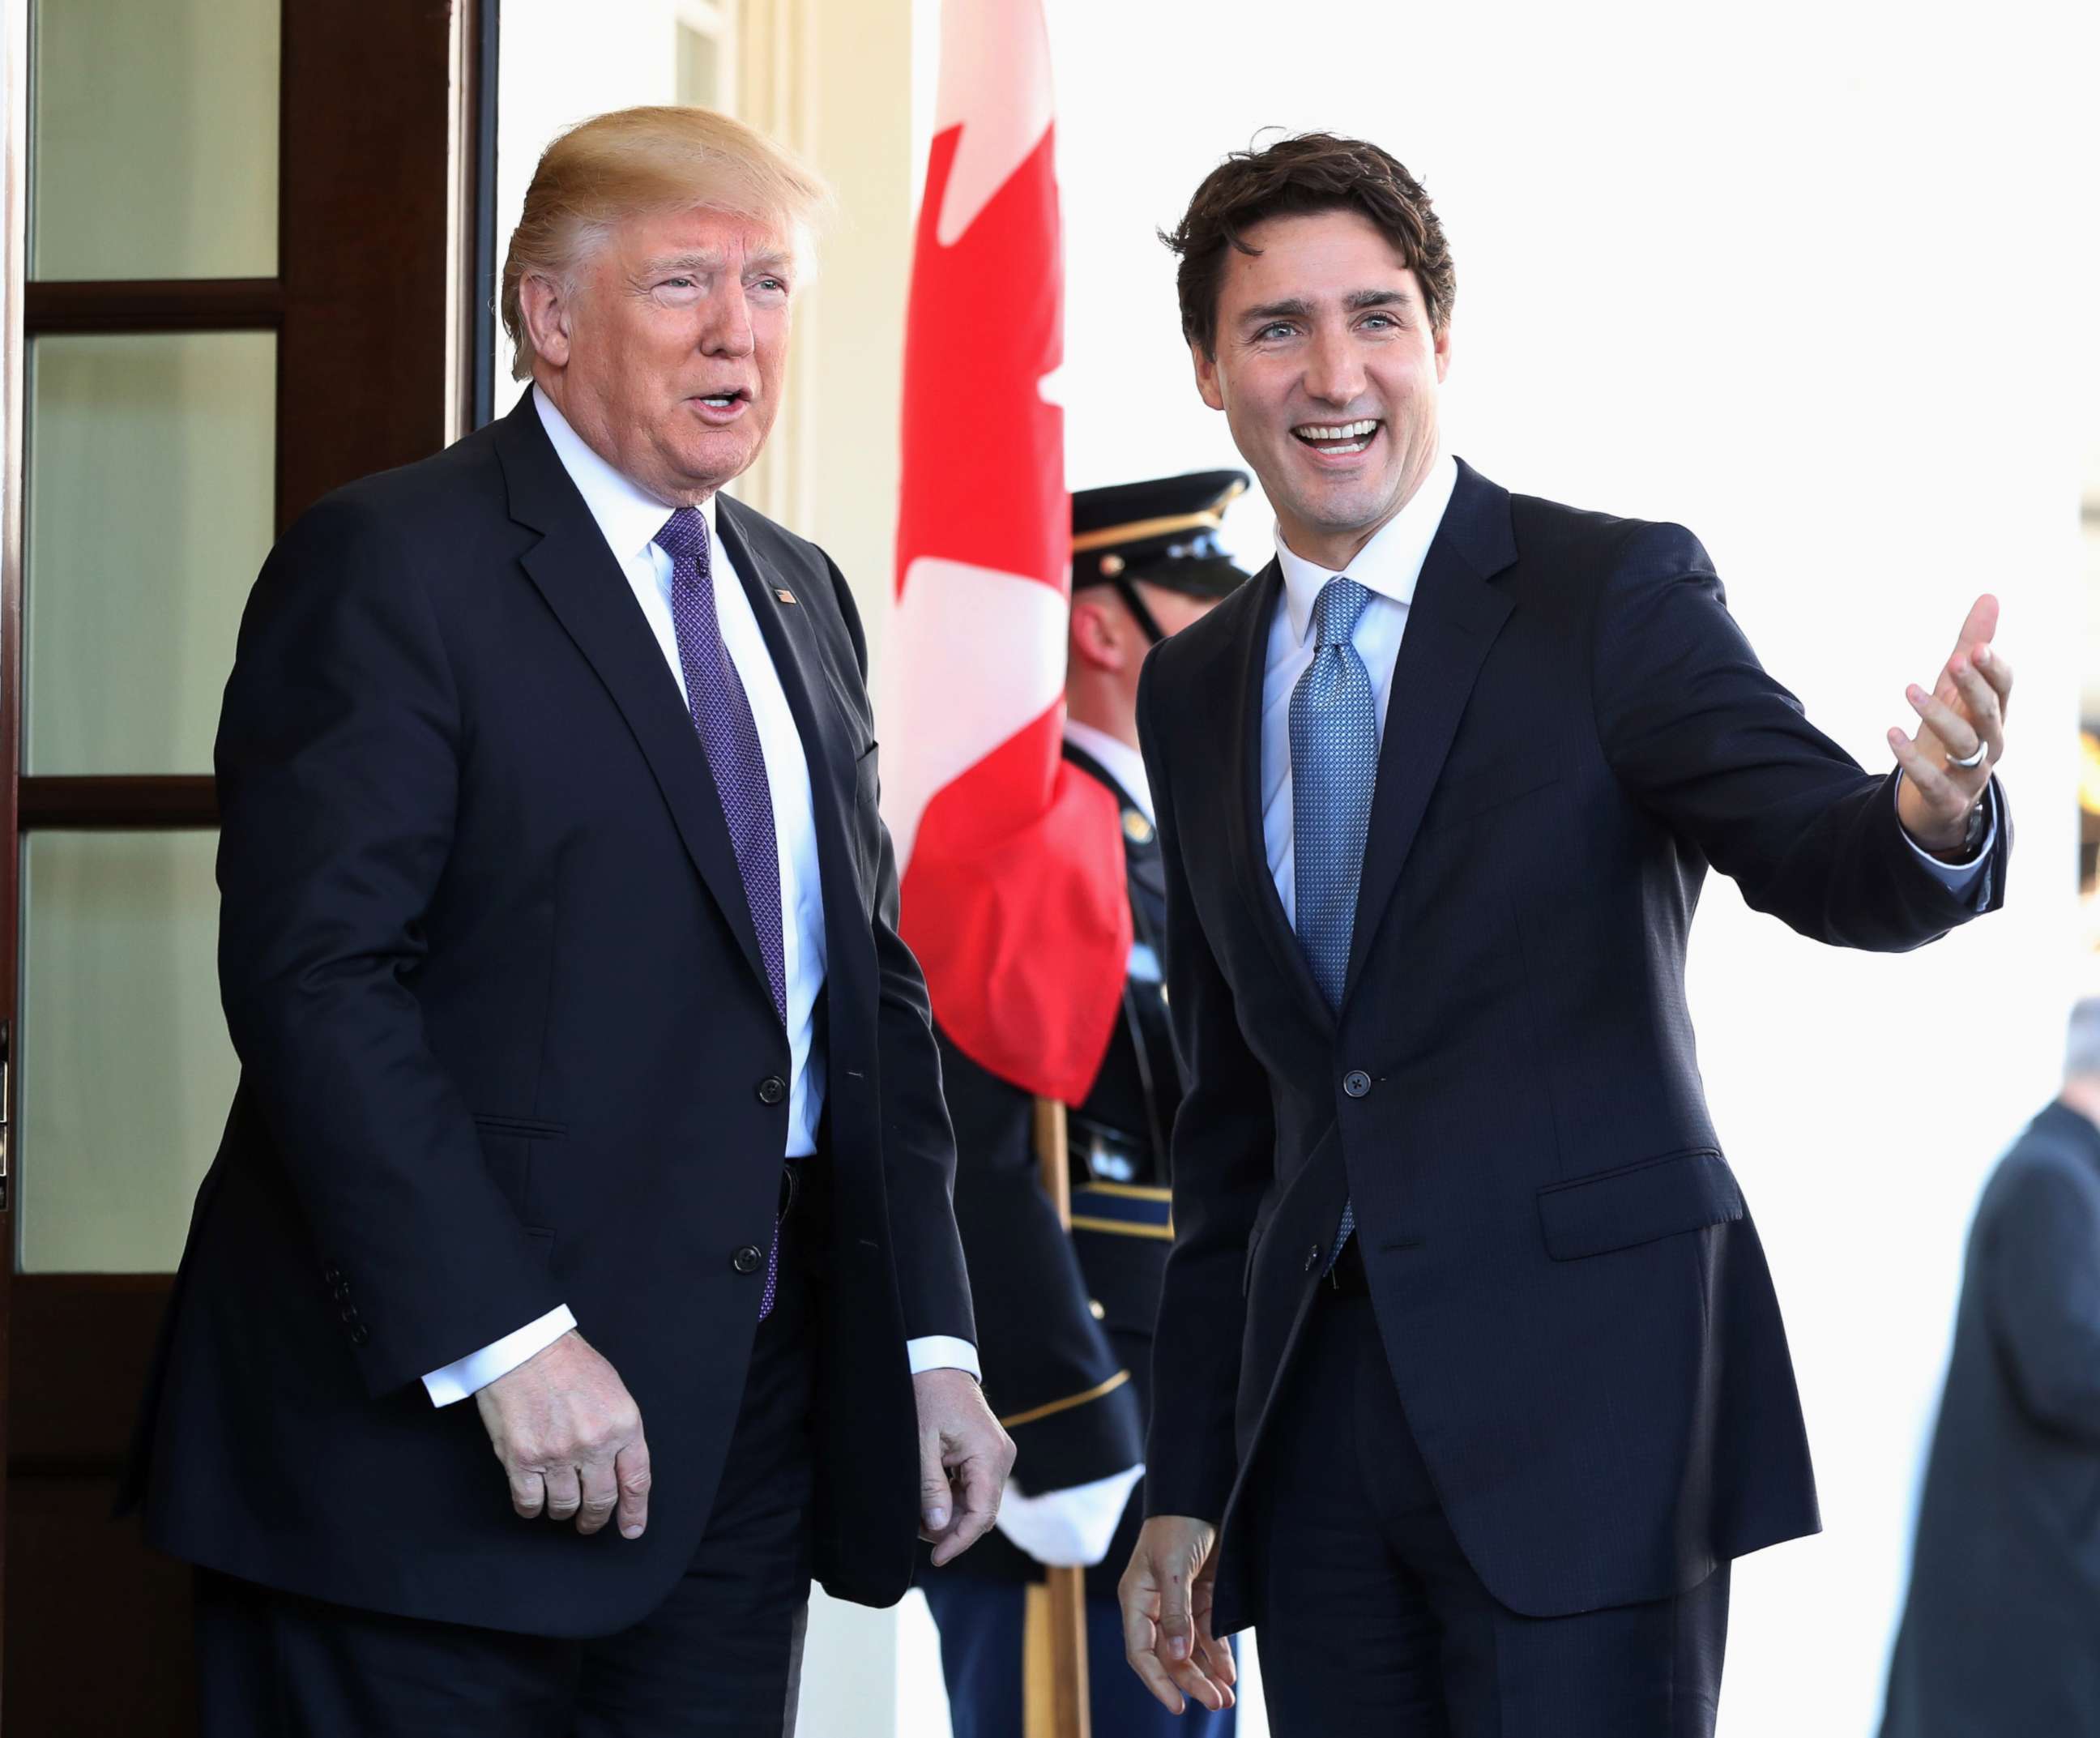 PHOTO: President Donald Trump greets Canadian Prime Minister Justin Trudeau upon his arrival at the White House in Washington, Feb. 13, 2017.